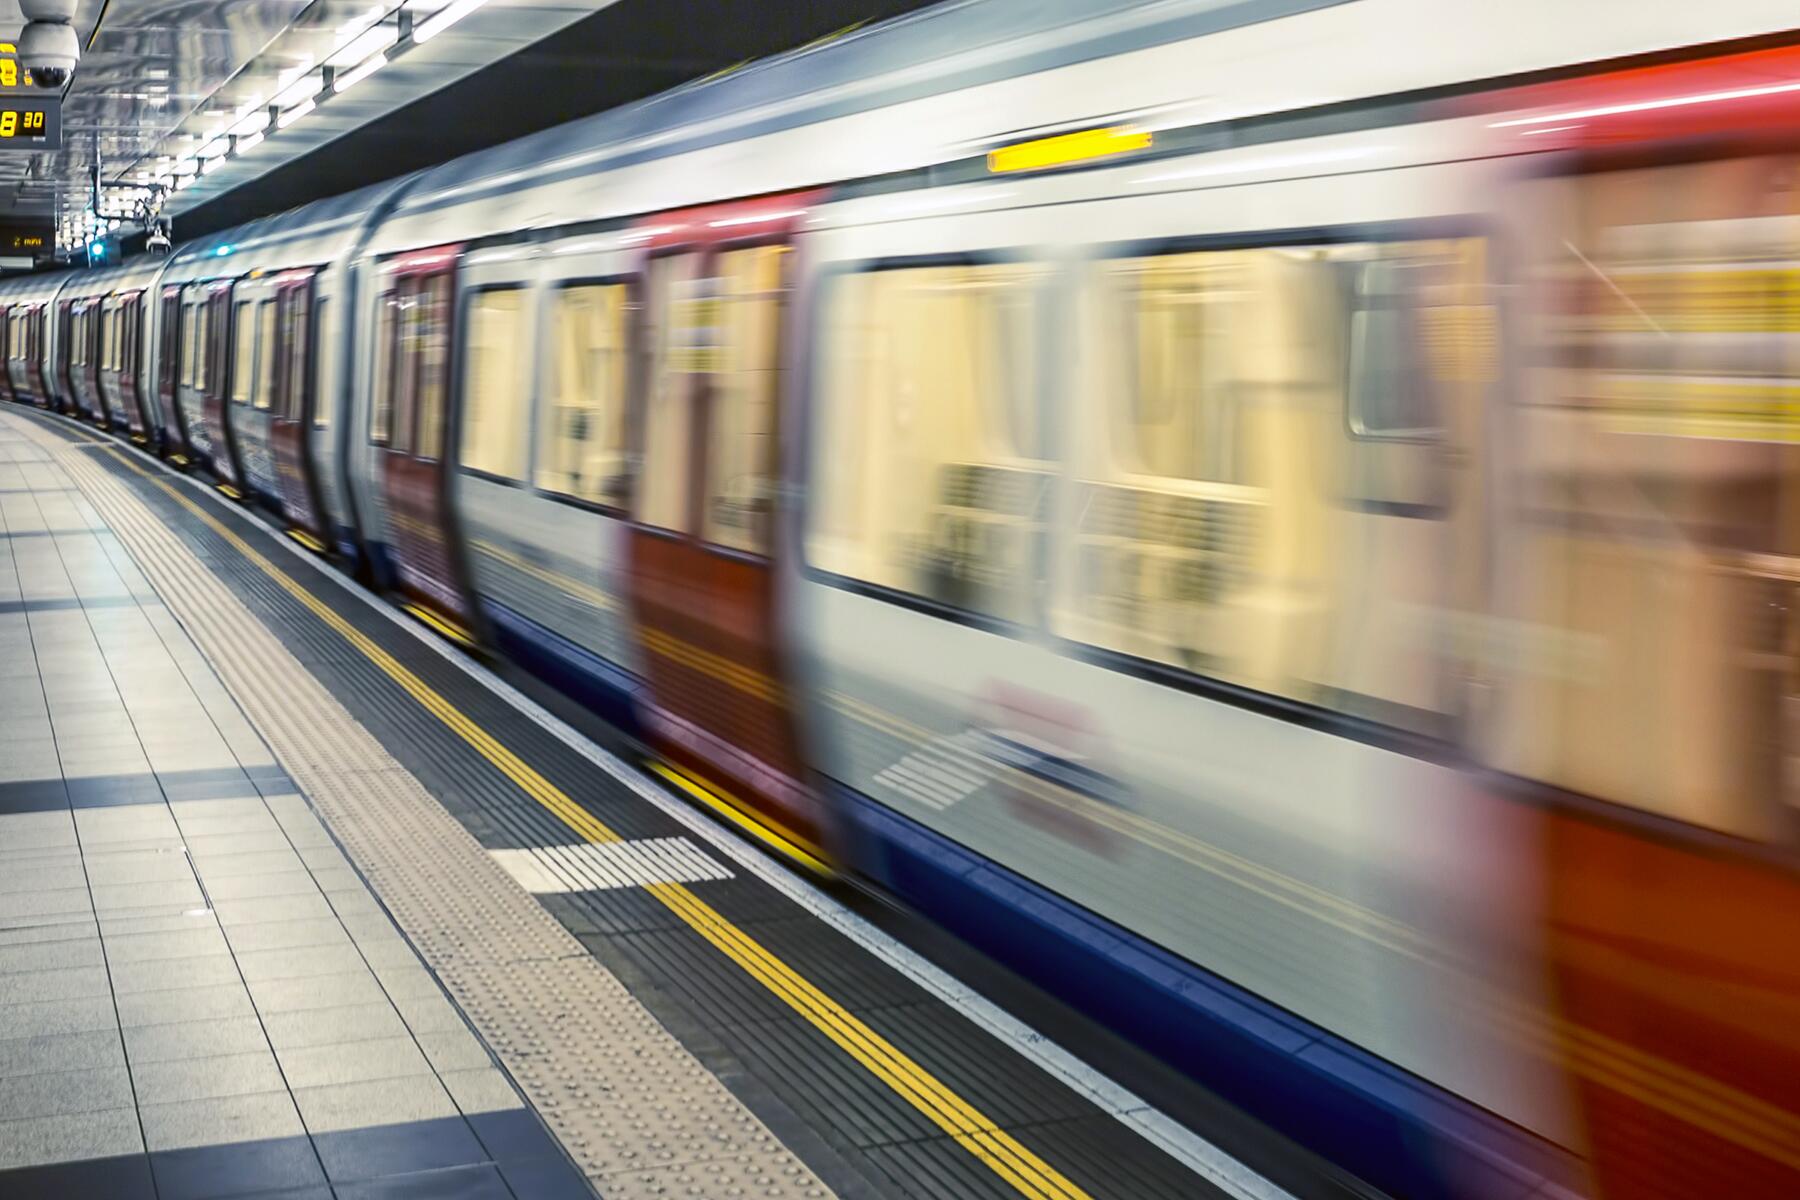 How to Use the Tube, the London Underground